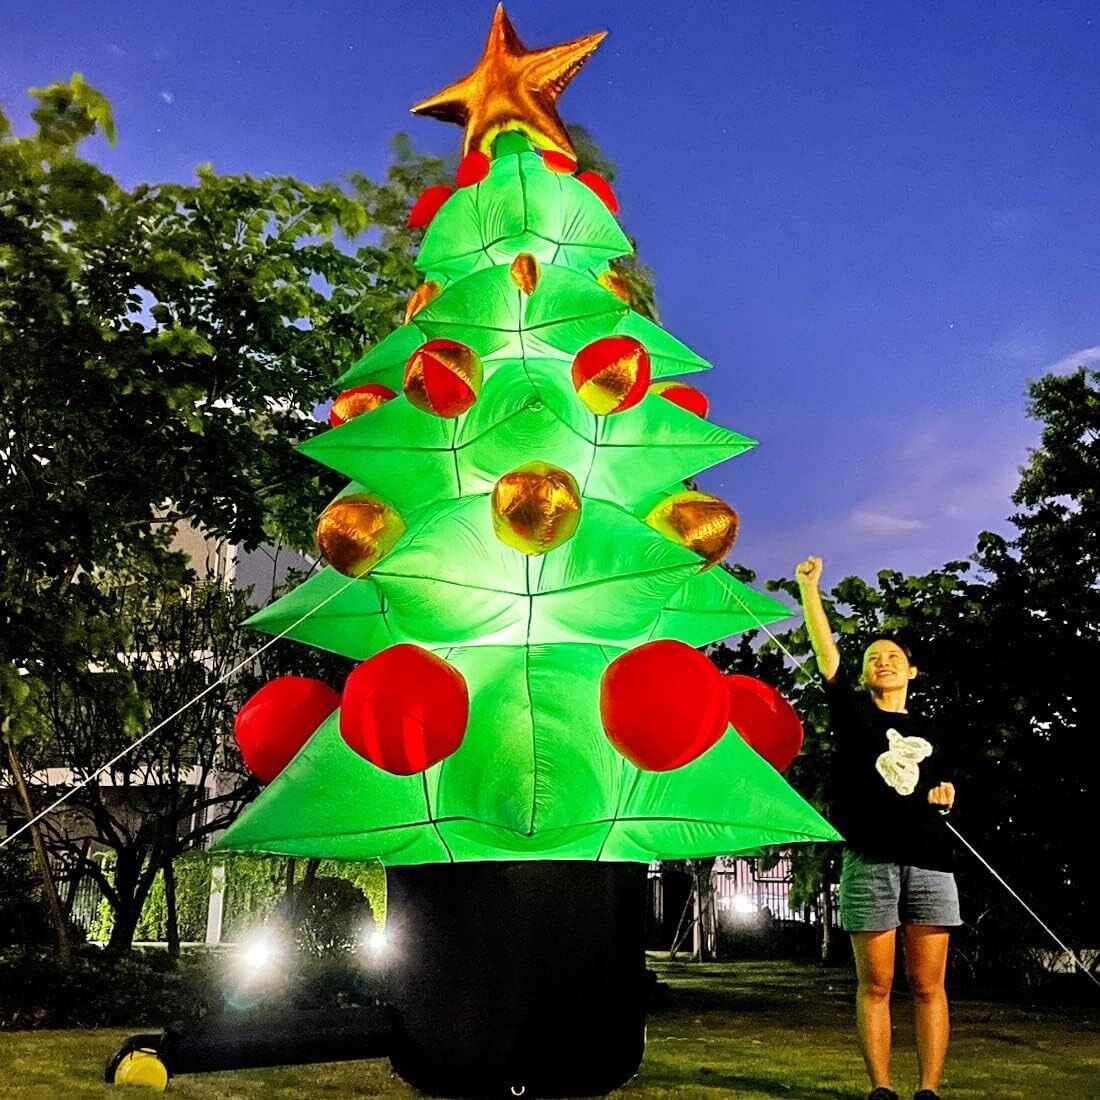 Electron Beast 13Ft Christmas Inflatable Green Tree with Built-in LED Lights